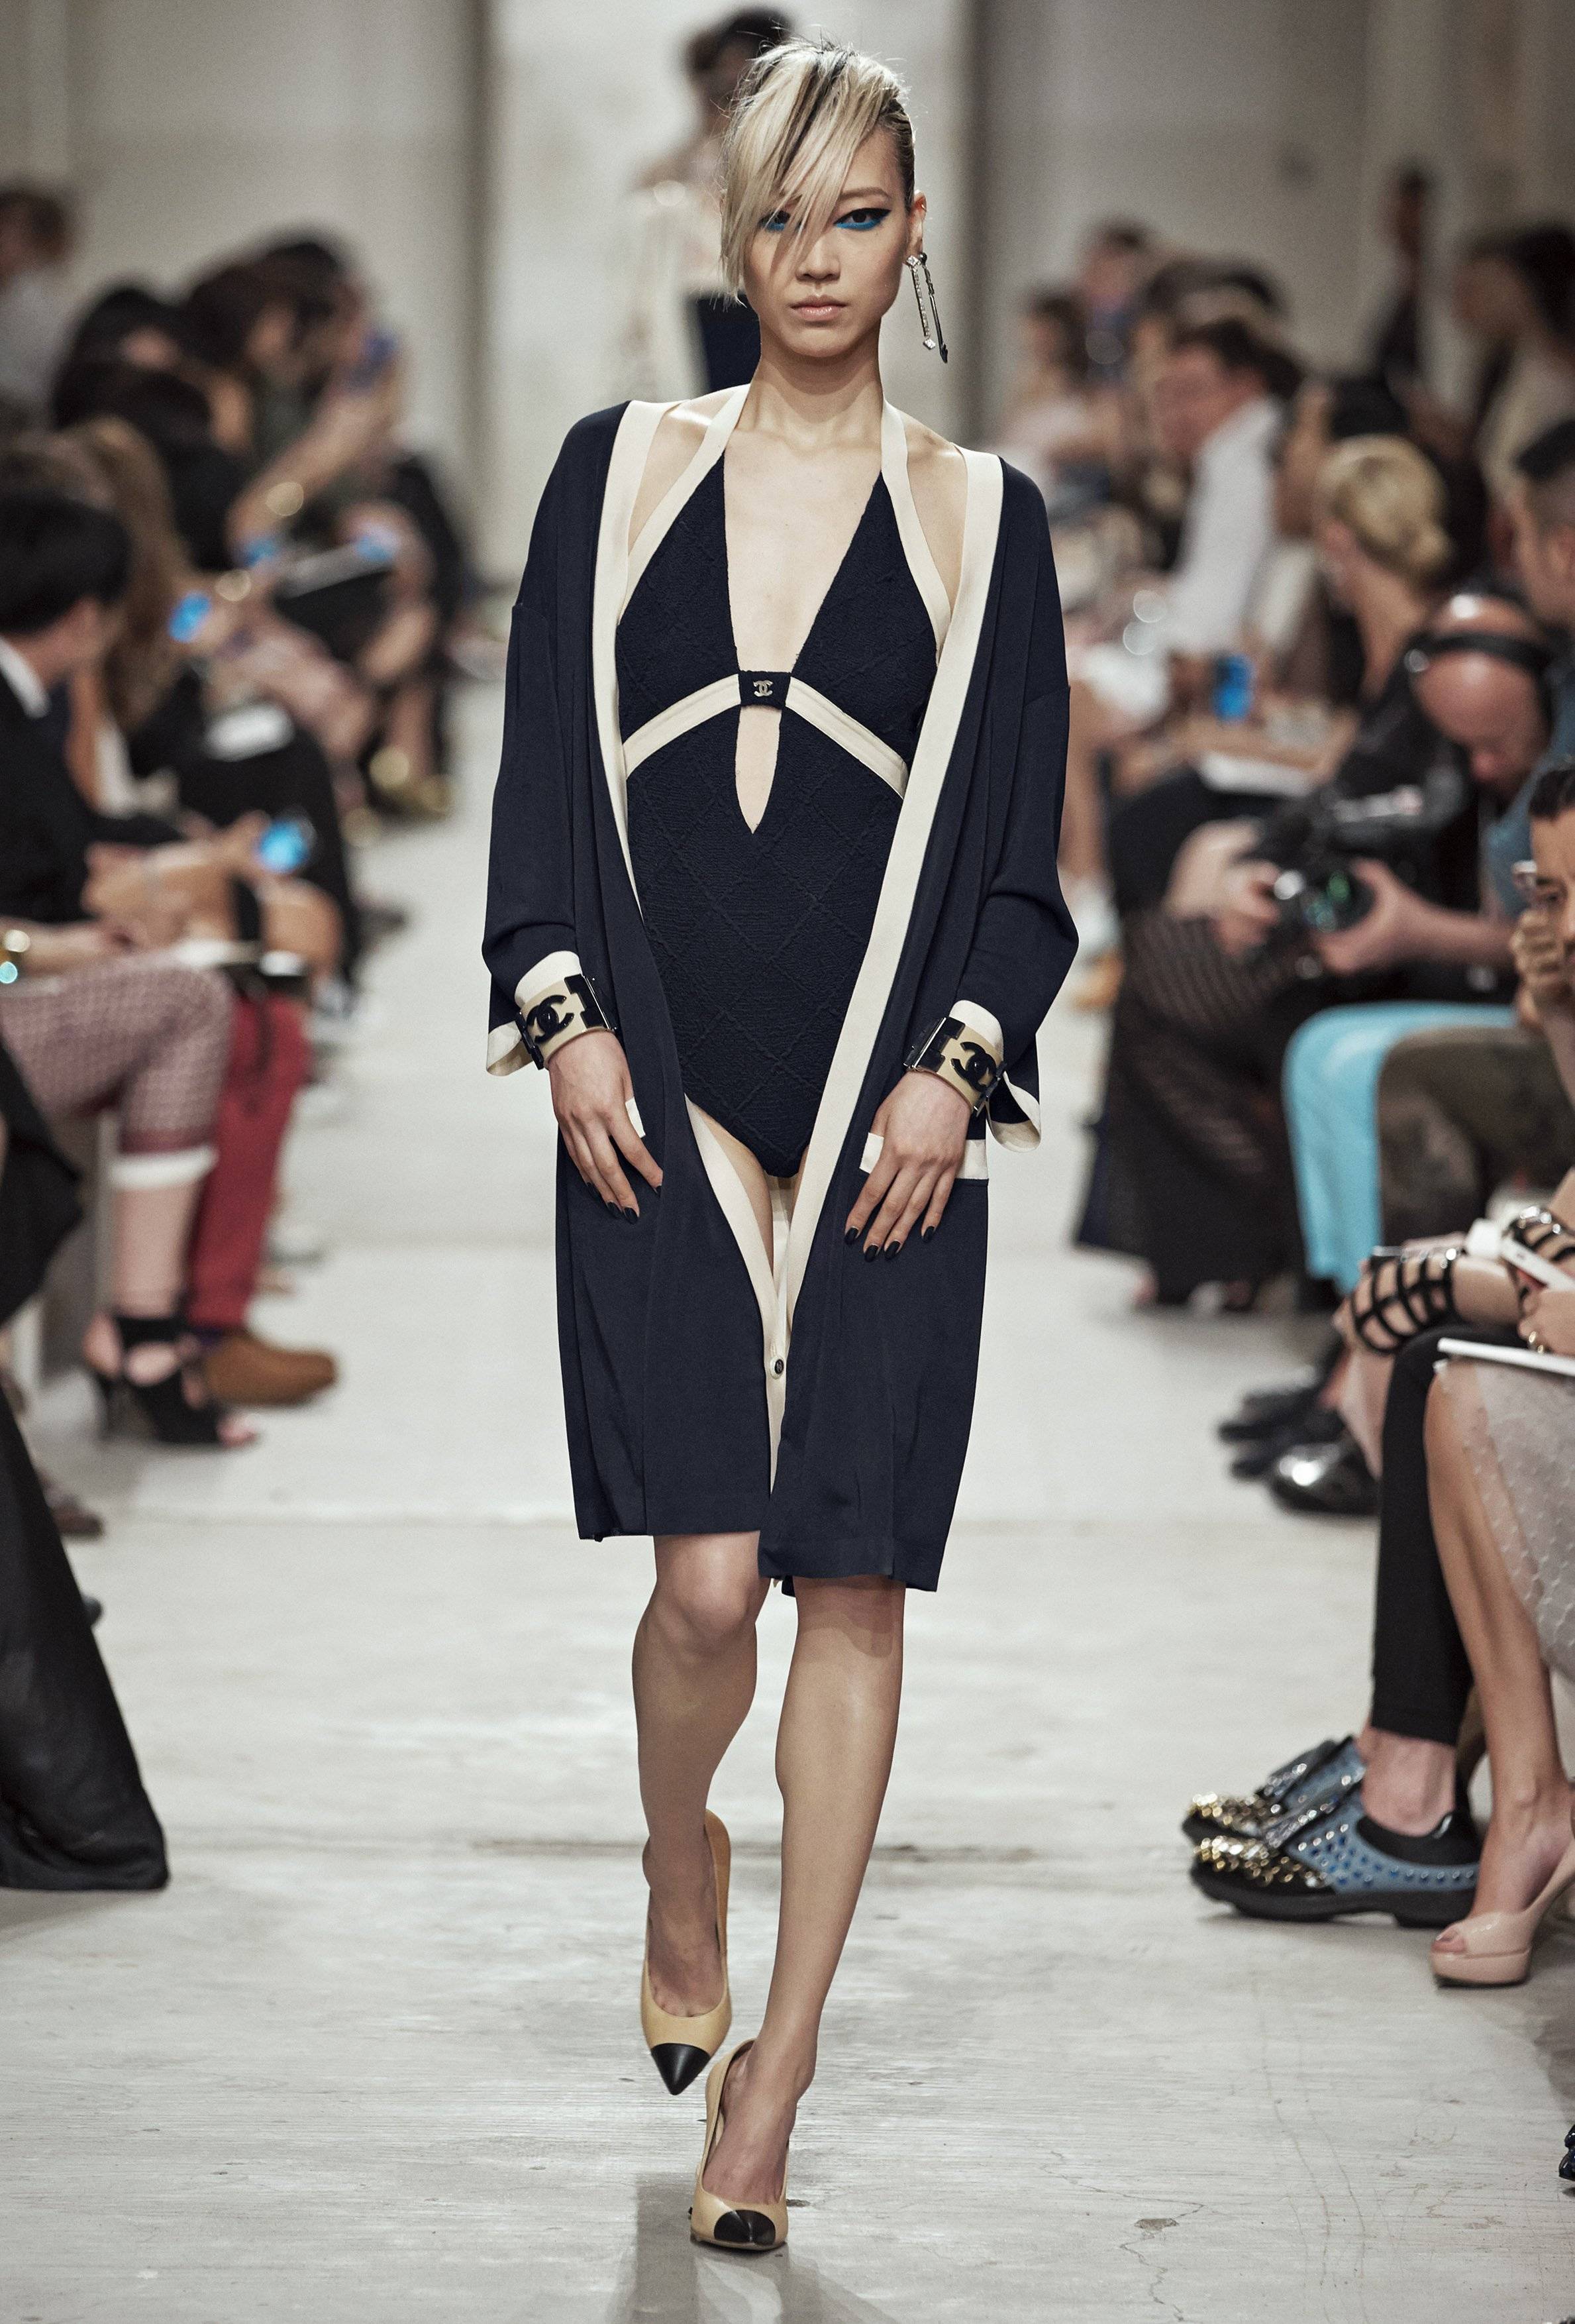 CHANEL Cruise 2013/14 Ready-to-Wear Collection